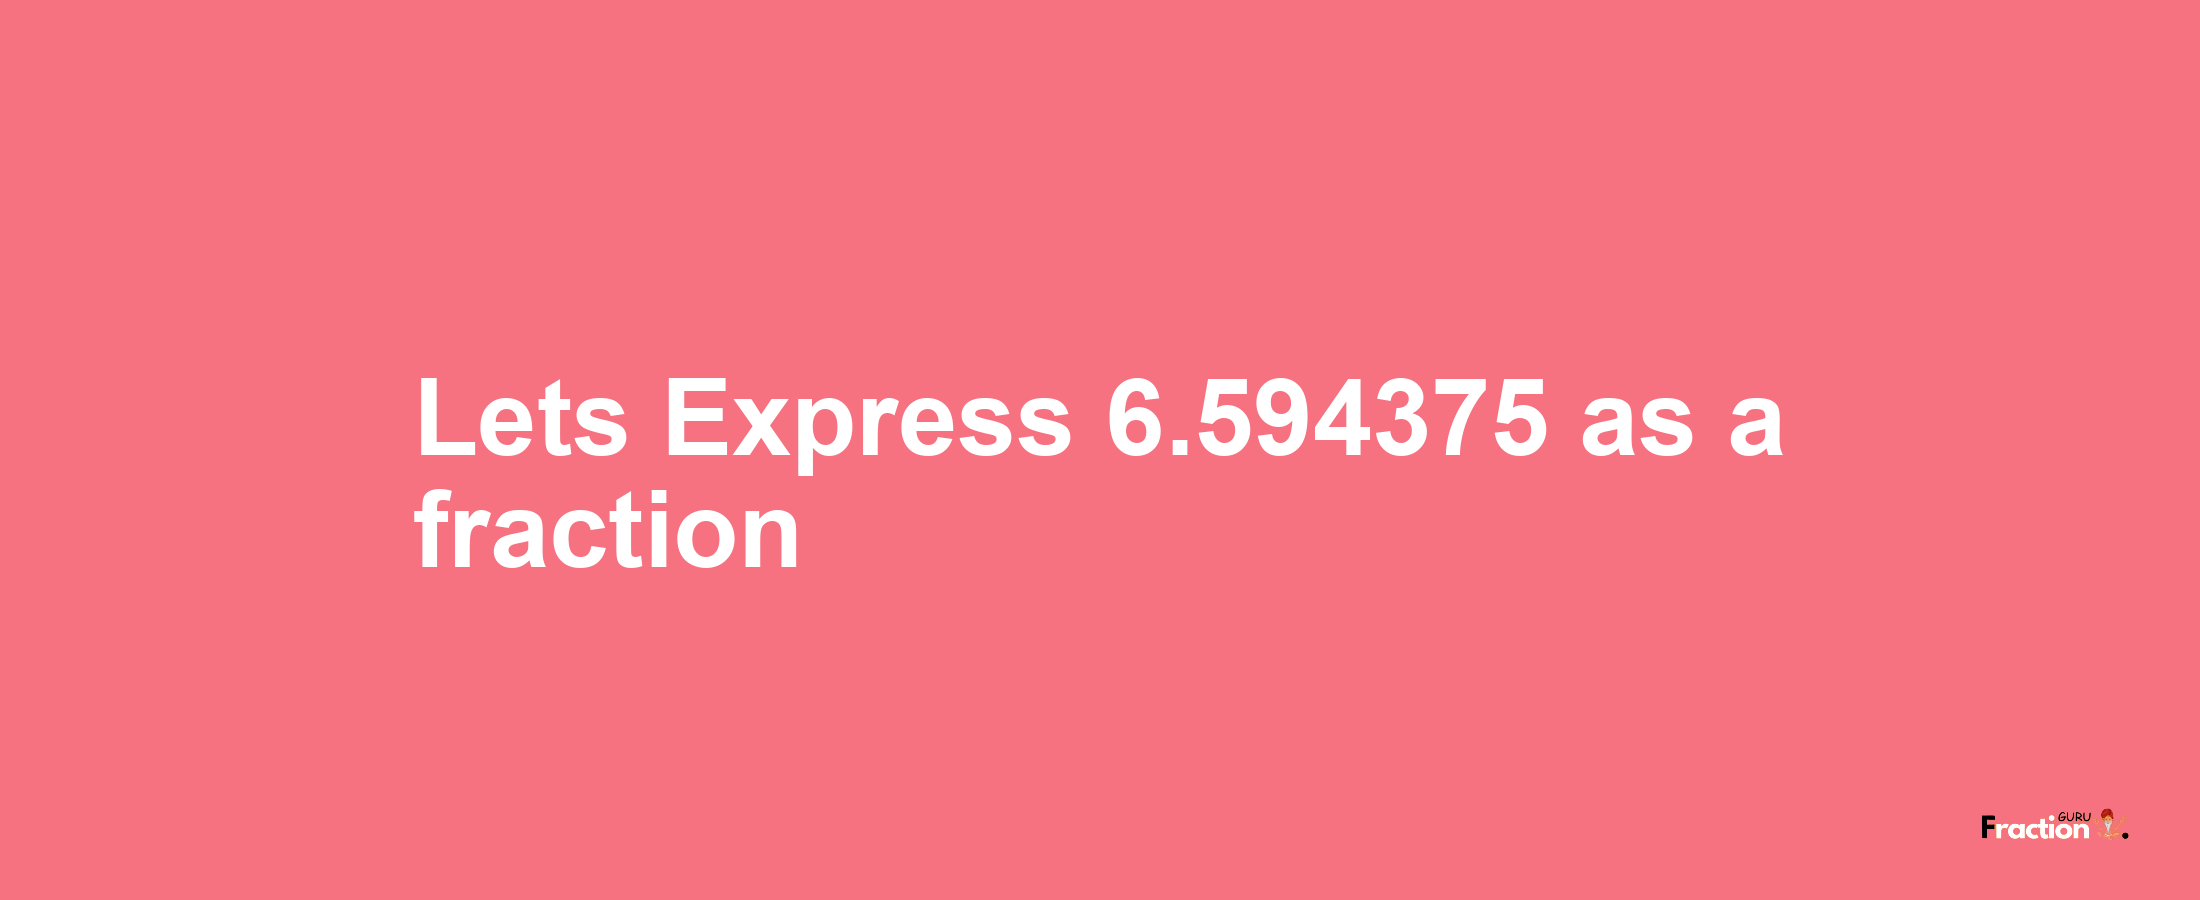 Lets Express 6.594375 as afraction